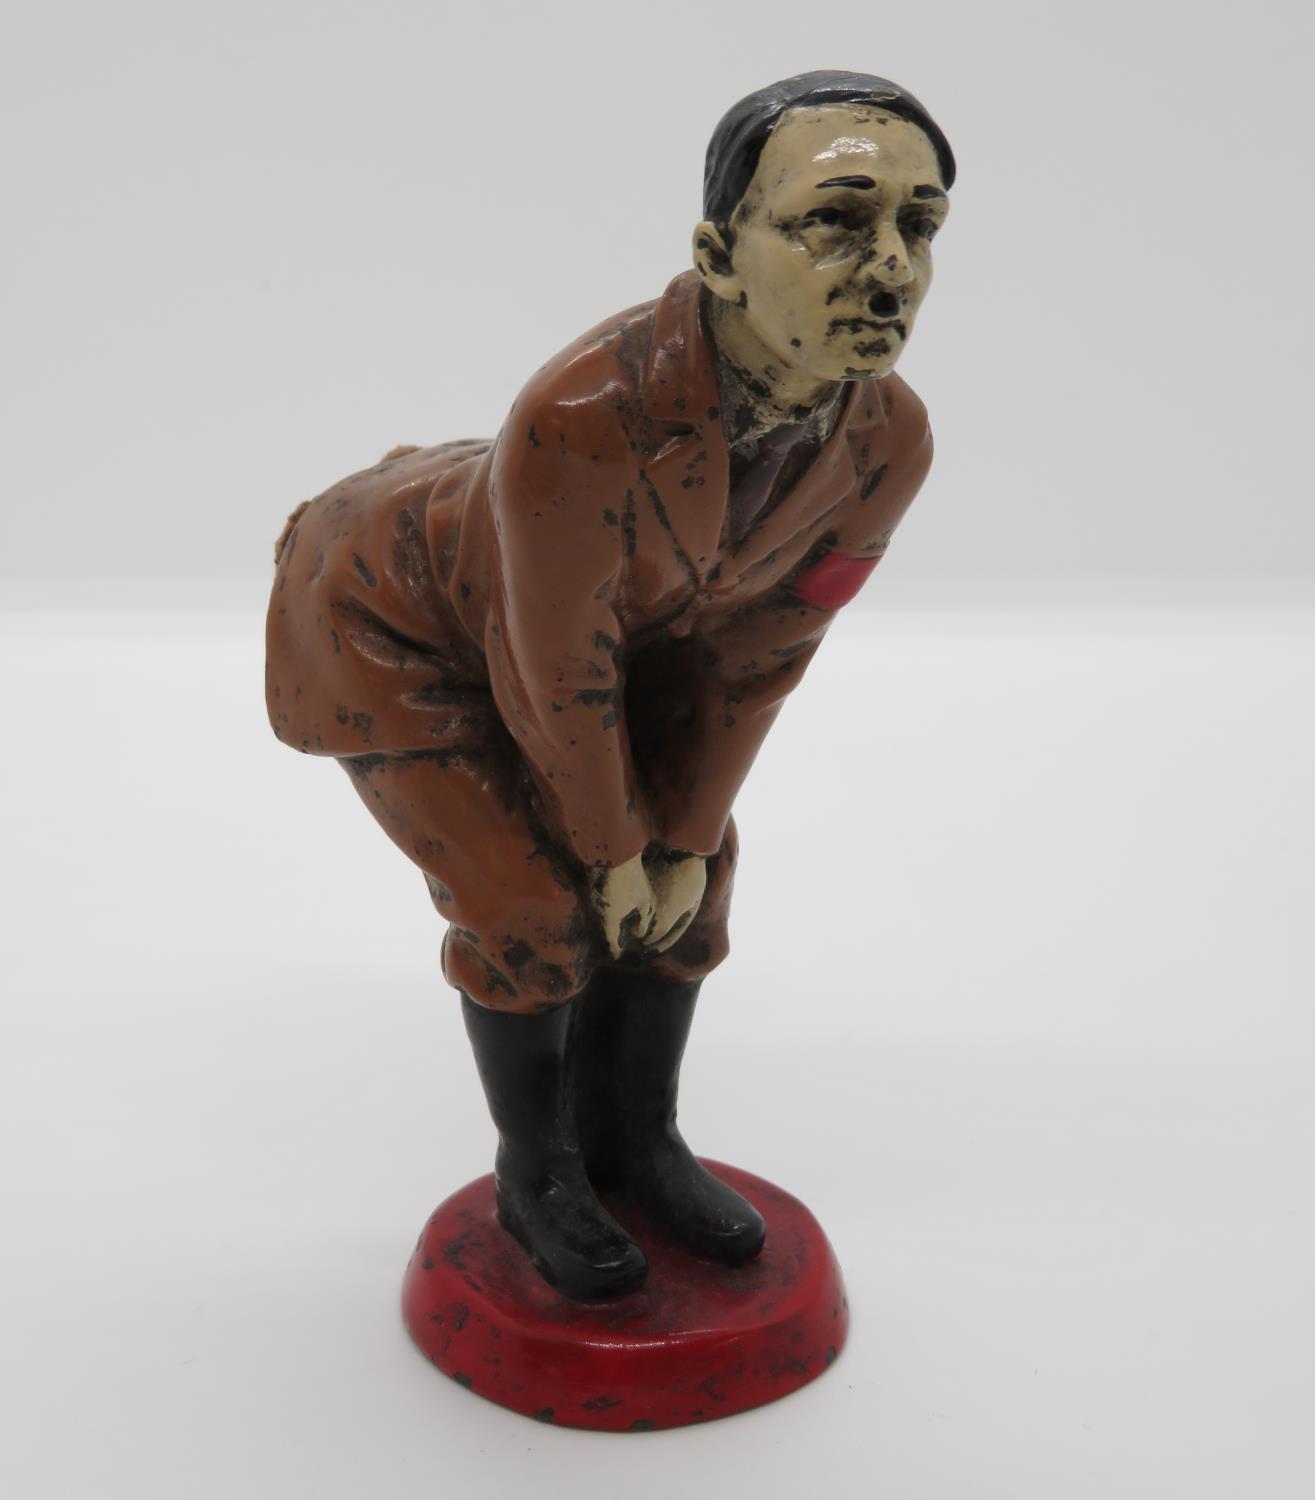 Cold cast bronze Adolf Hitler pin cushion 5" high - Image 4 of 7